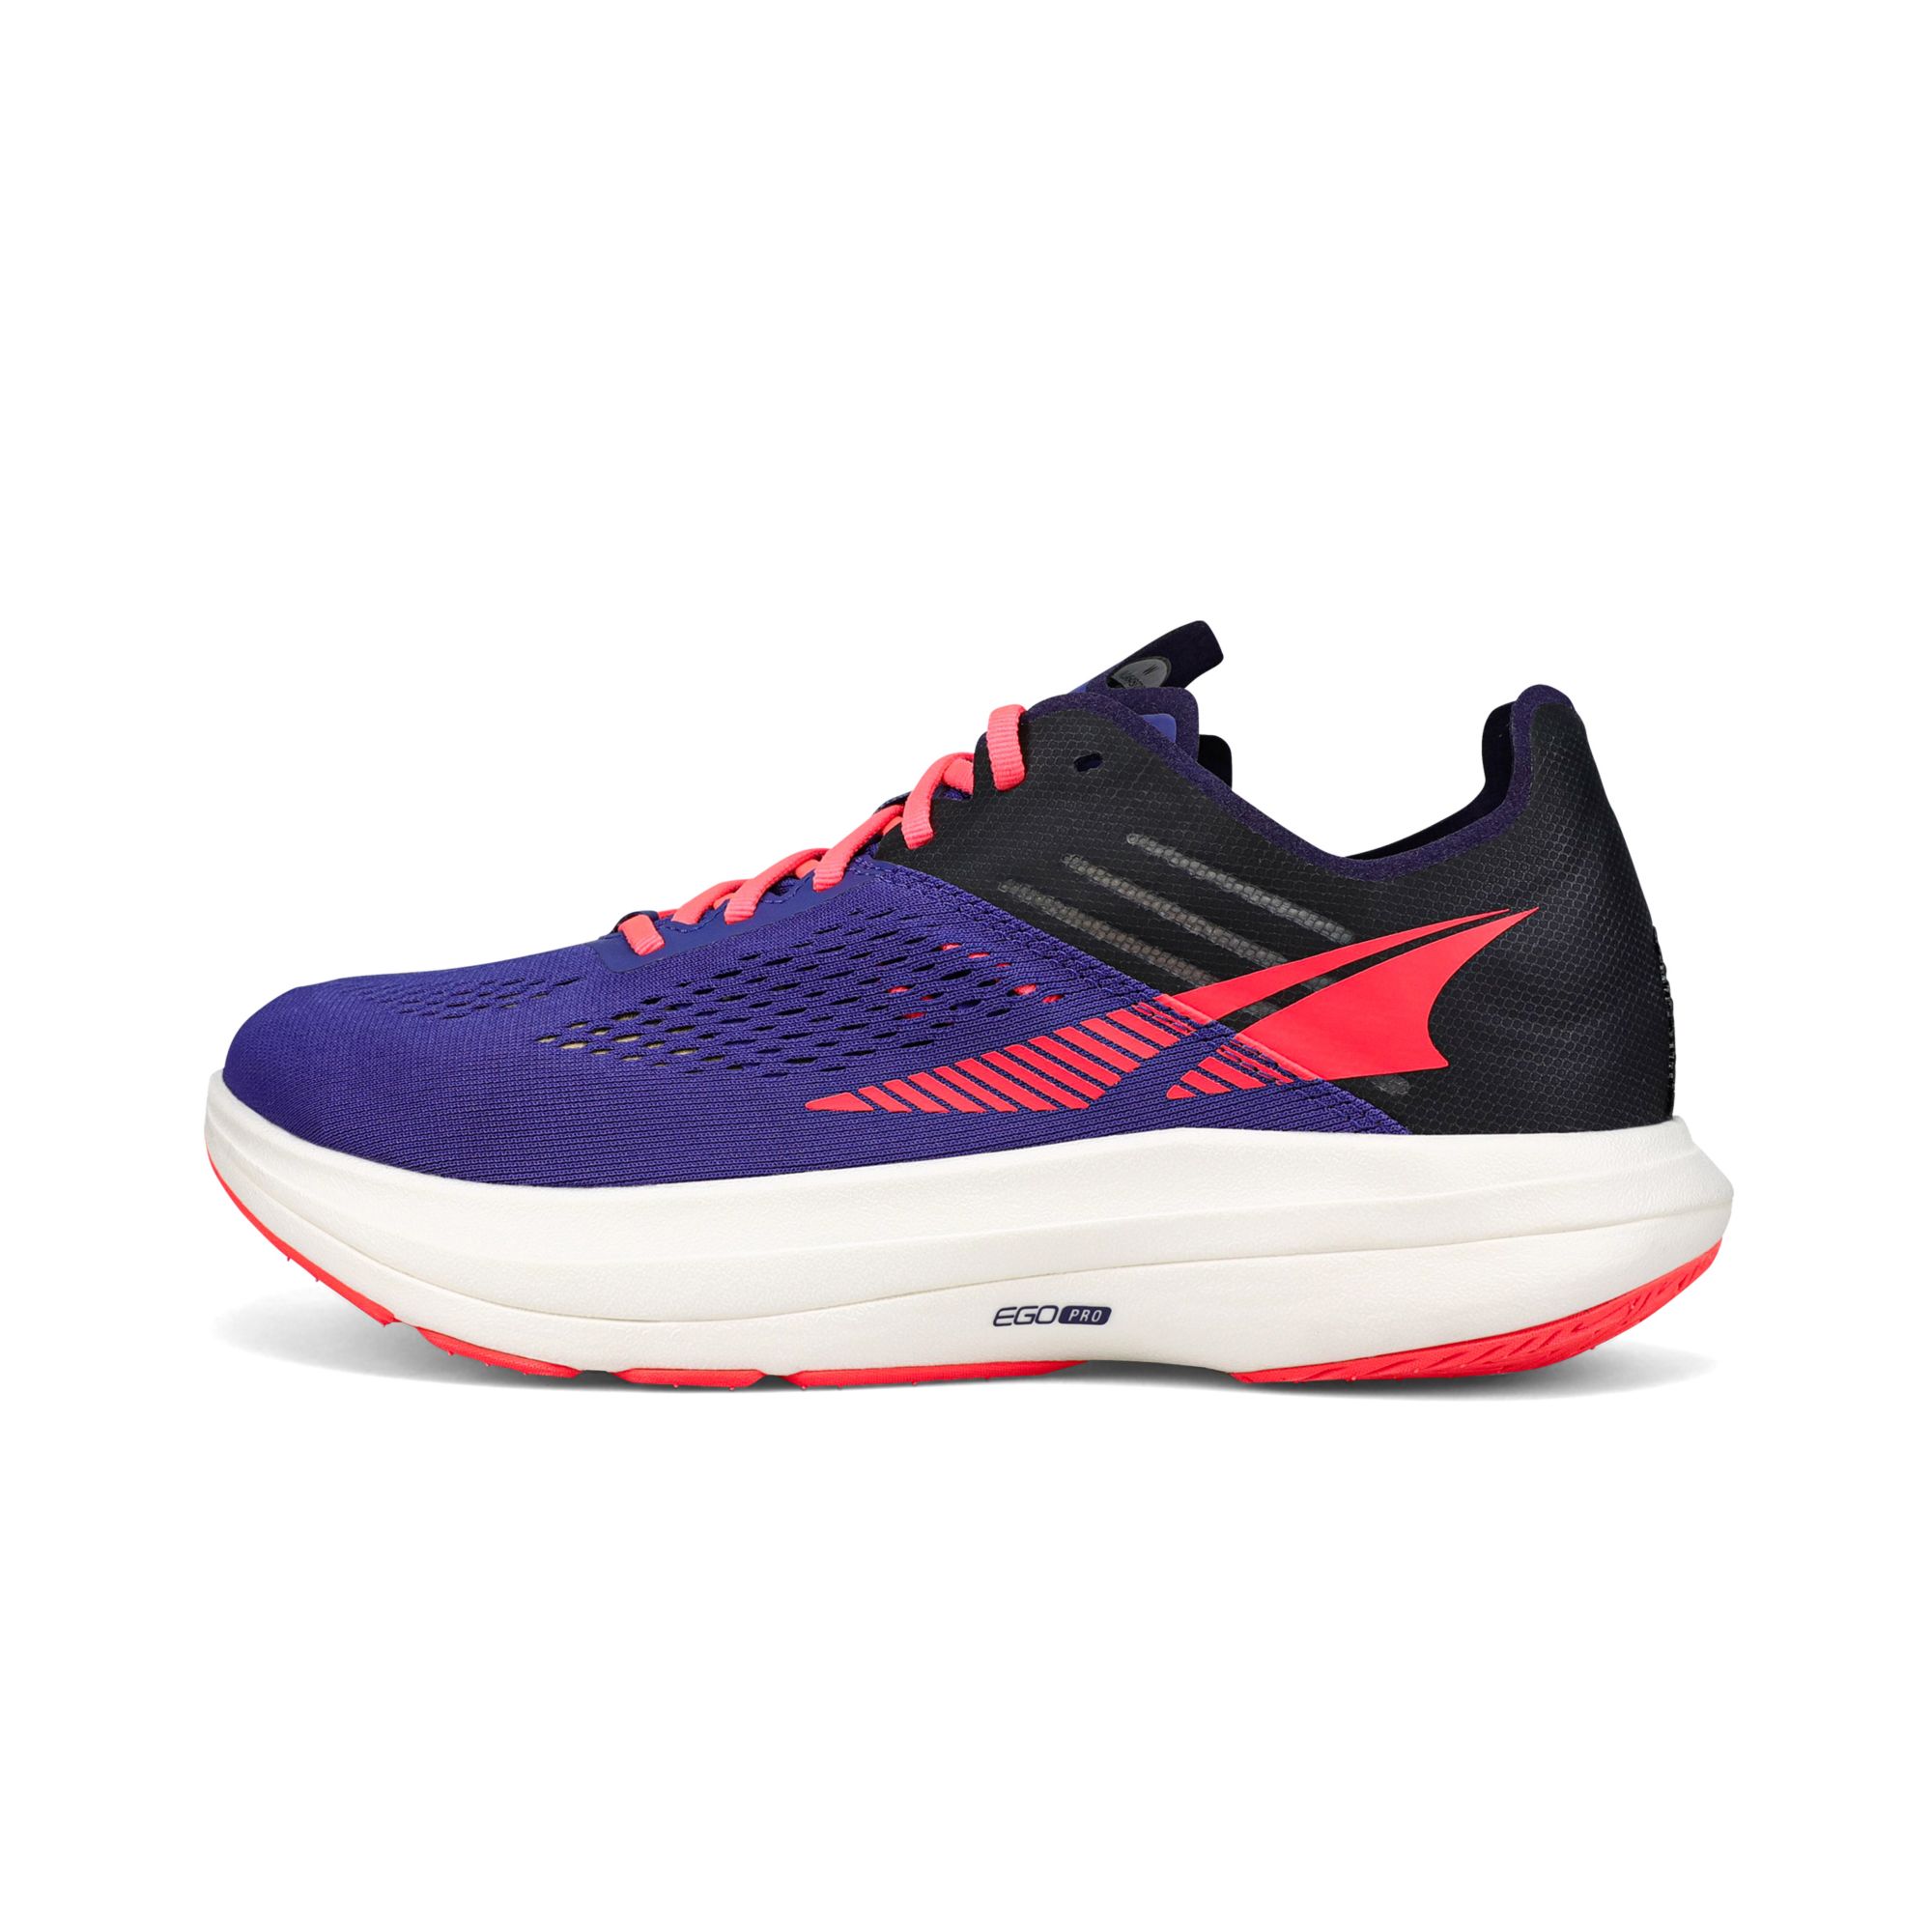 Women's Performance Running Shoes & Low Impact Shoes | Altra® Running